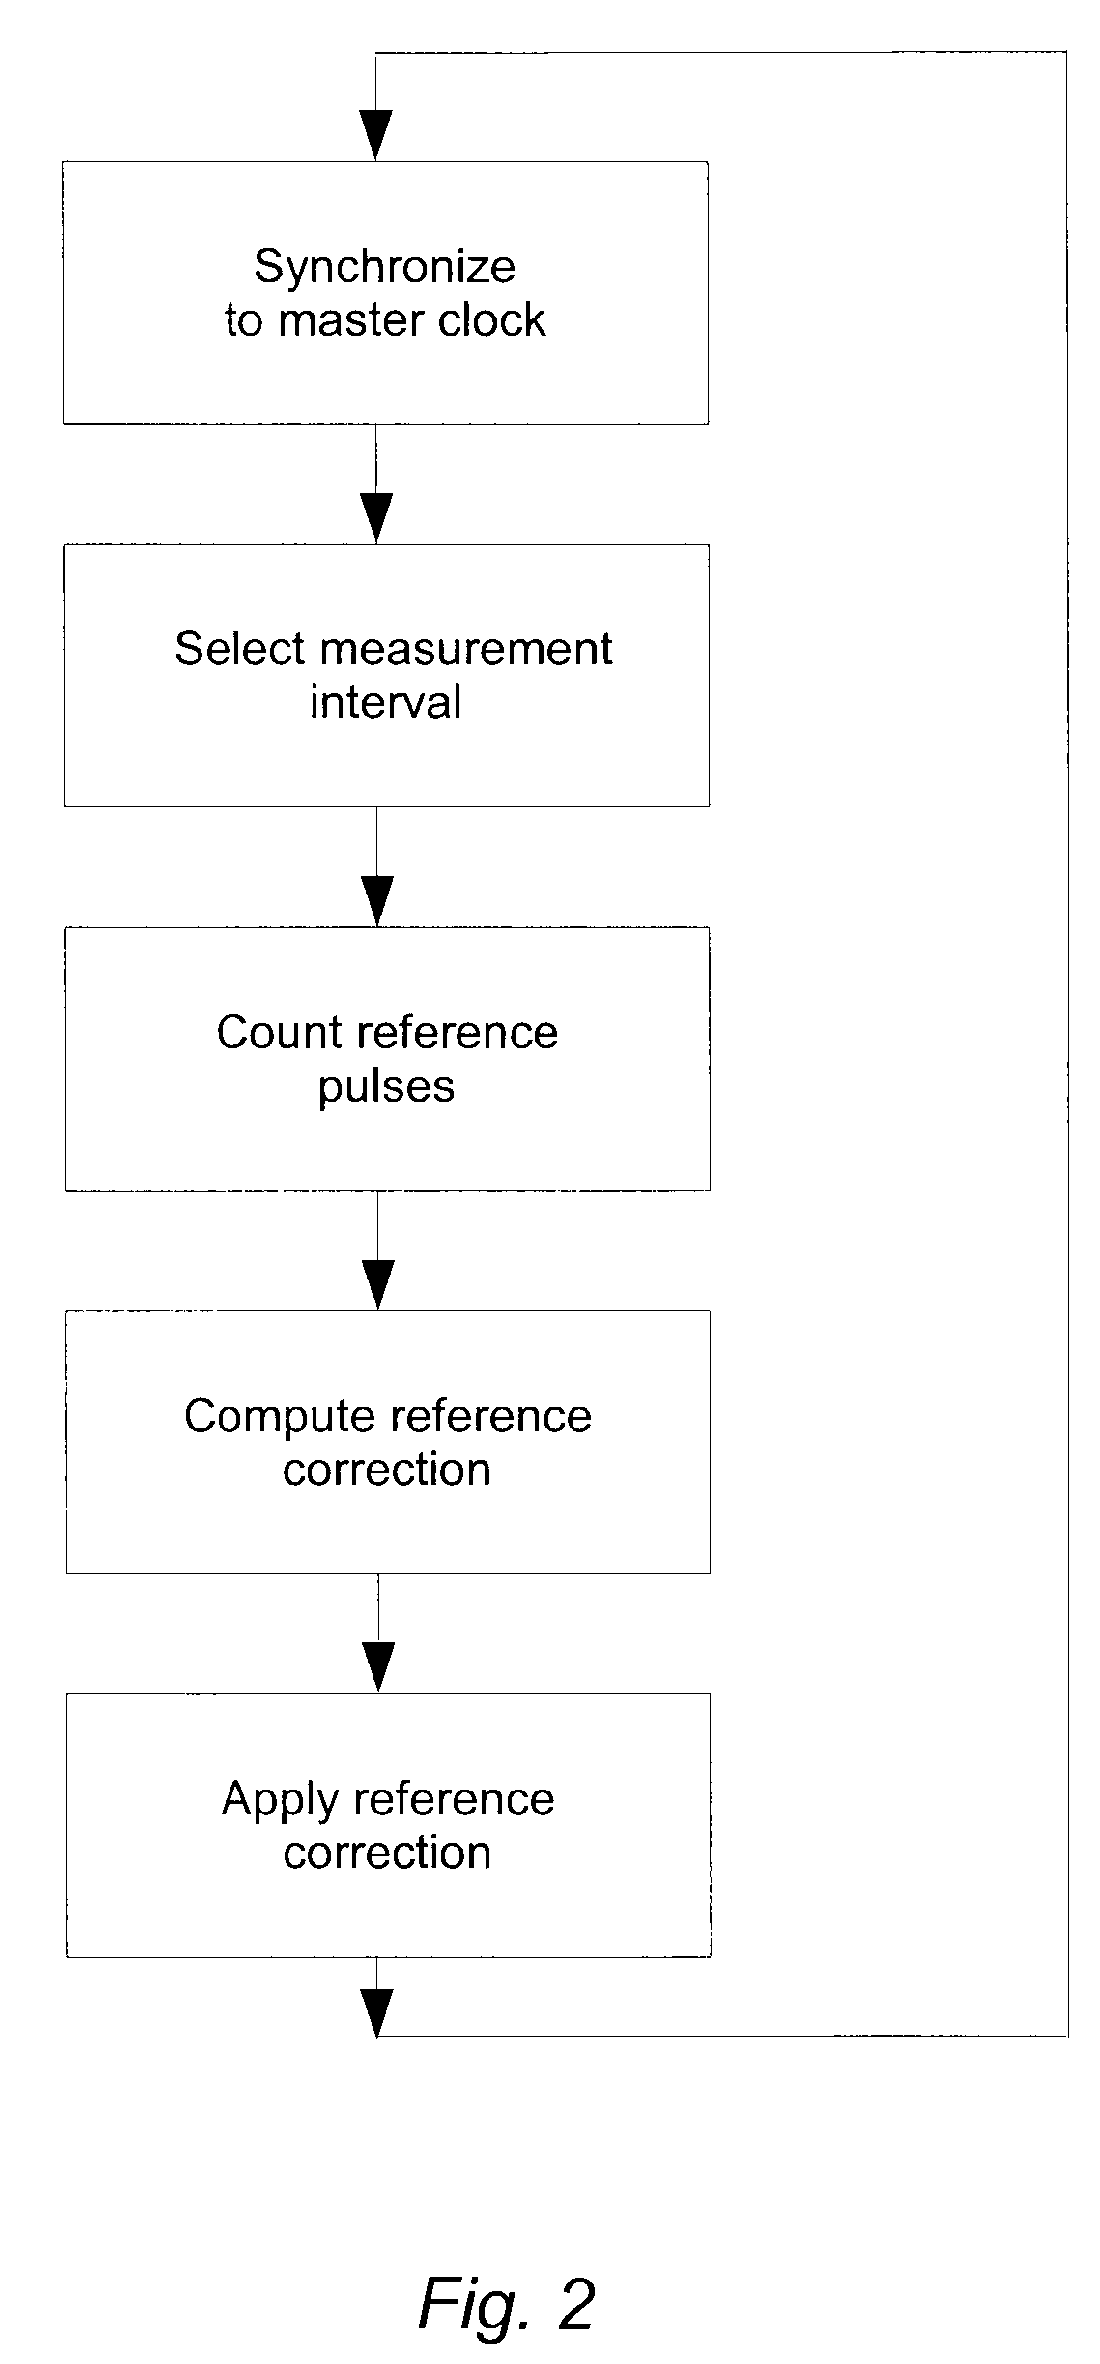 Distributing frequency references